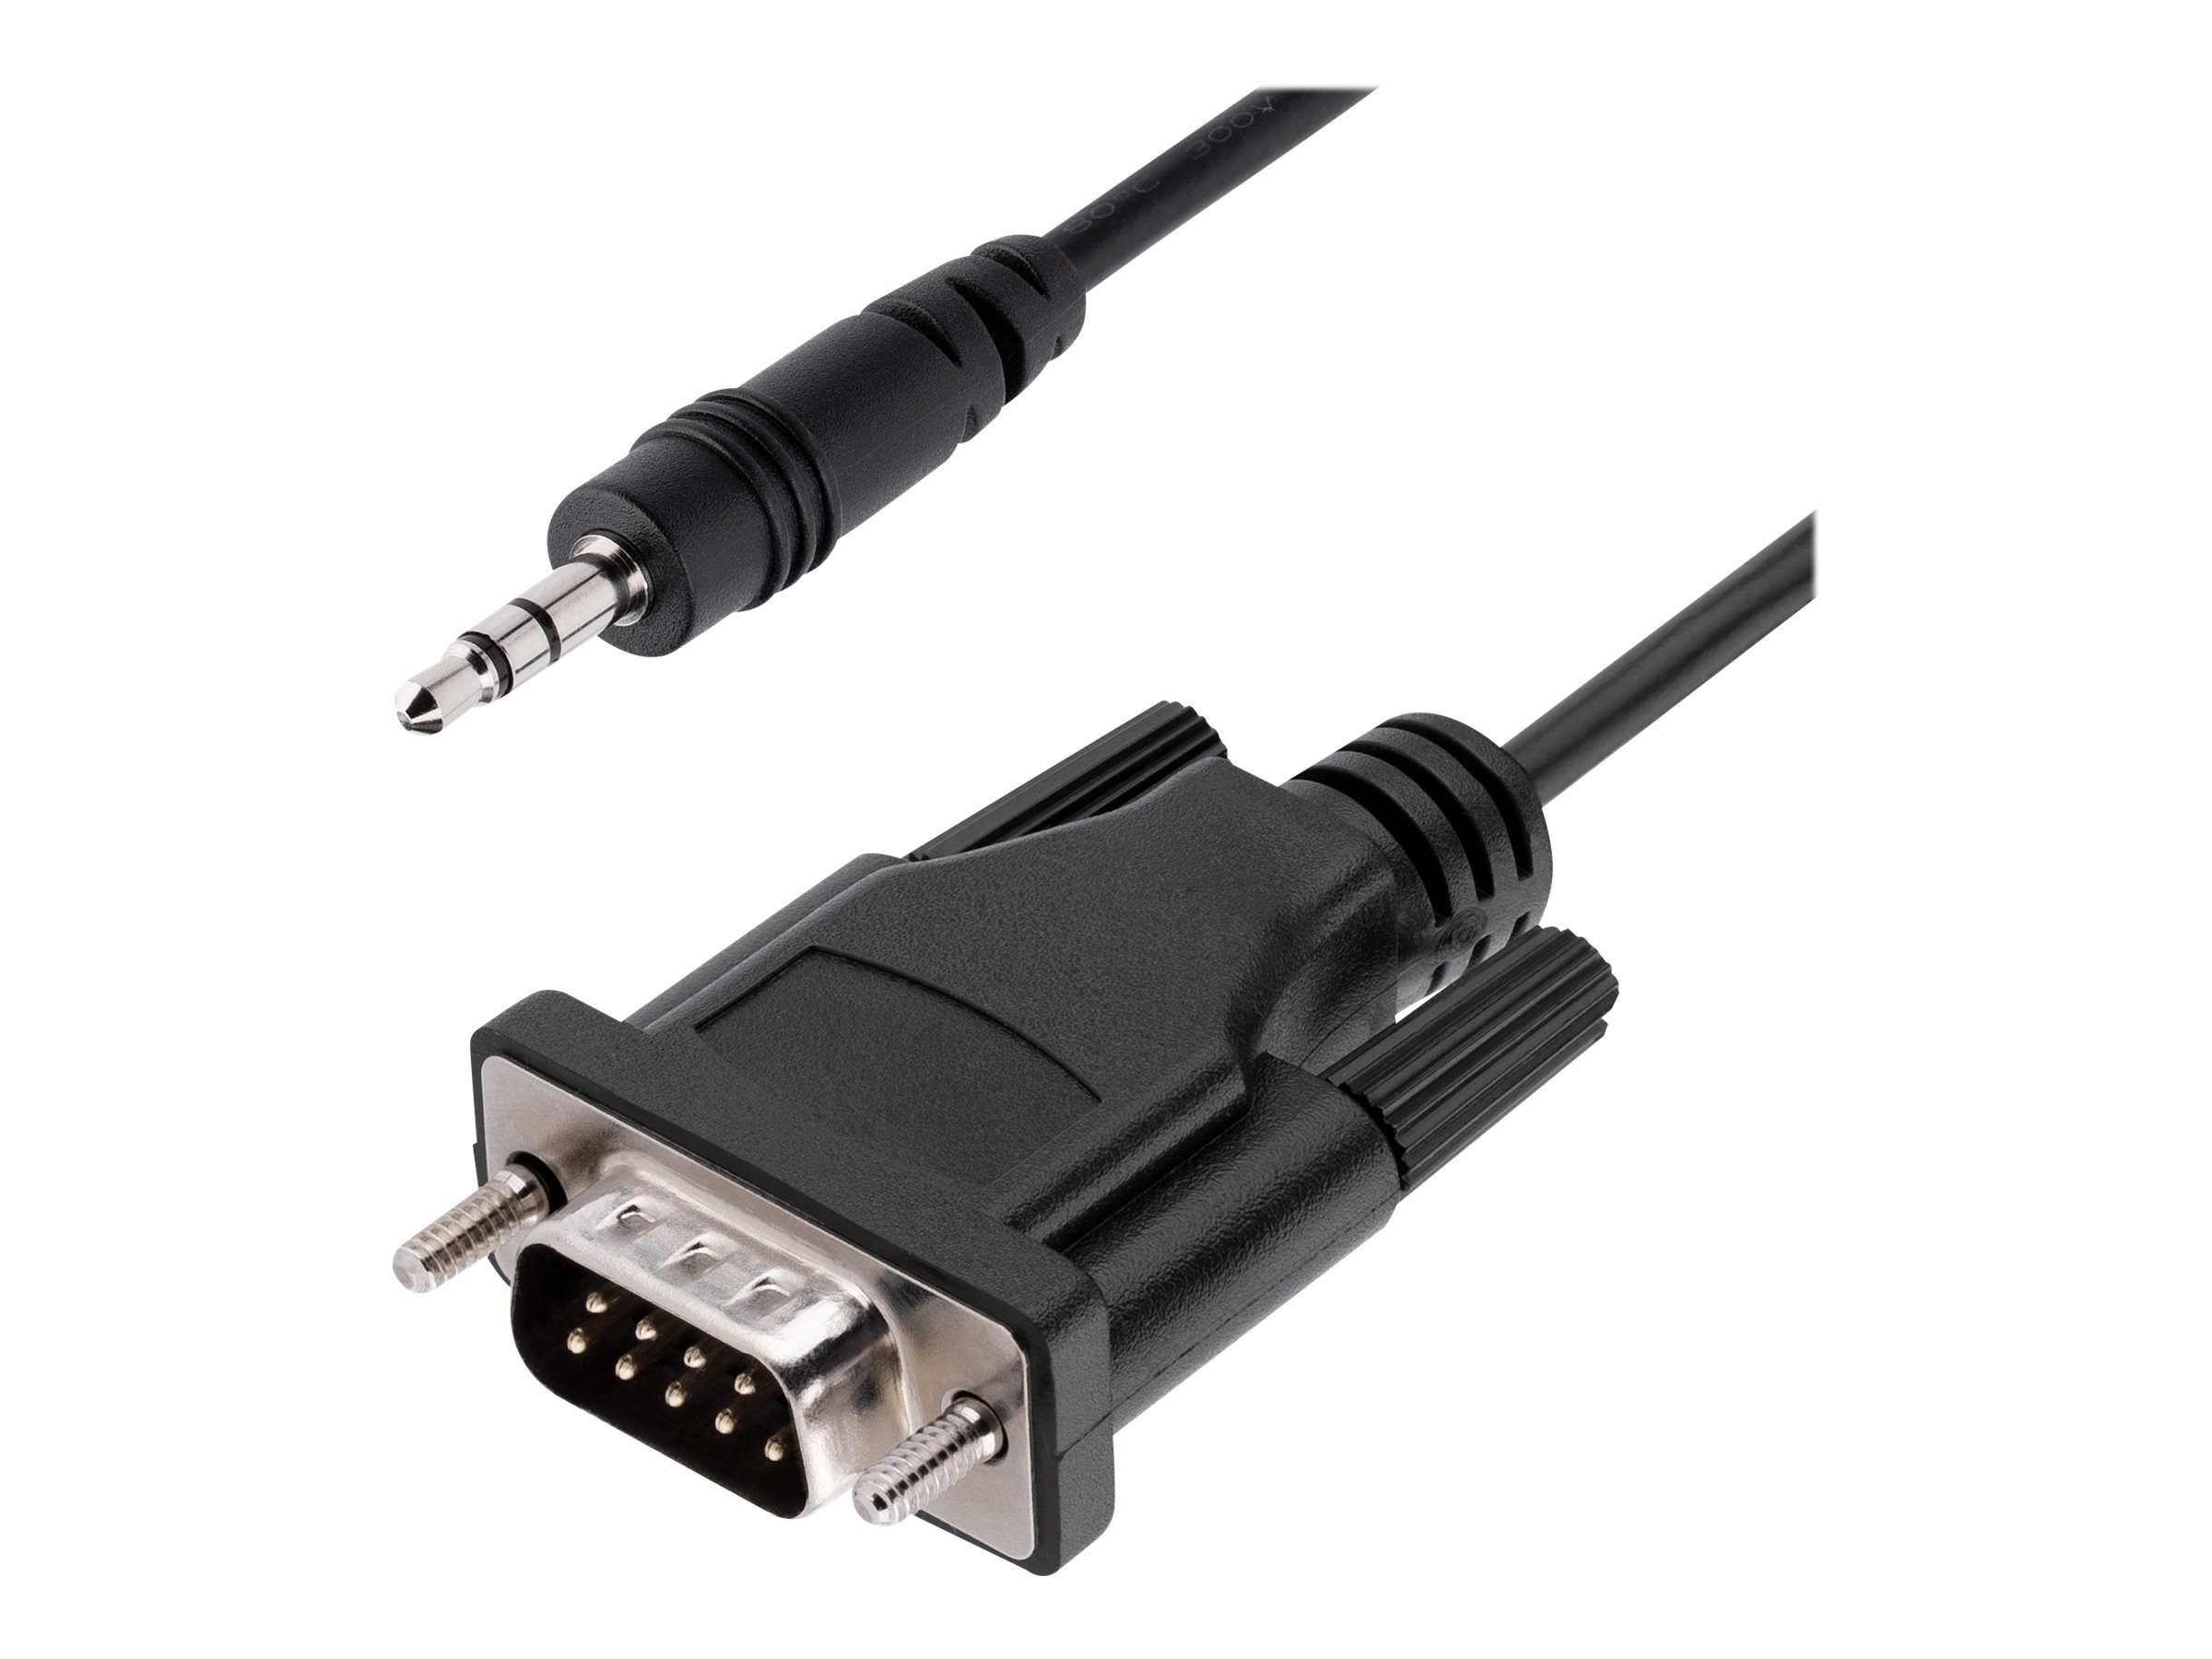 StarTech.com 3ft (1m) DB9 to 3.5mm Serial Cable for Serial Device Configuration, RS232 DB9 Male to 3.5mm Cable for Calibrating P